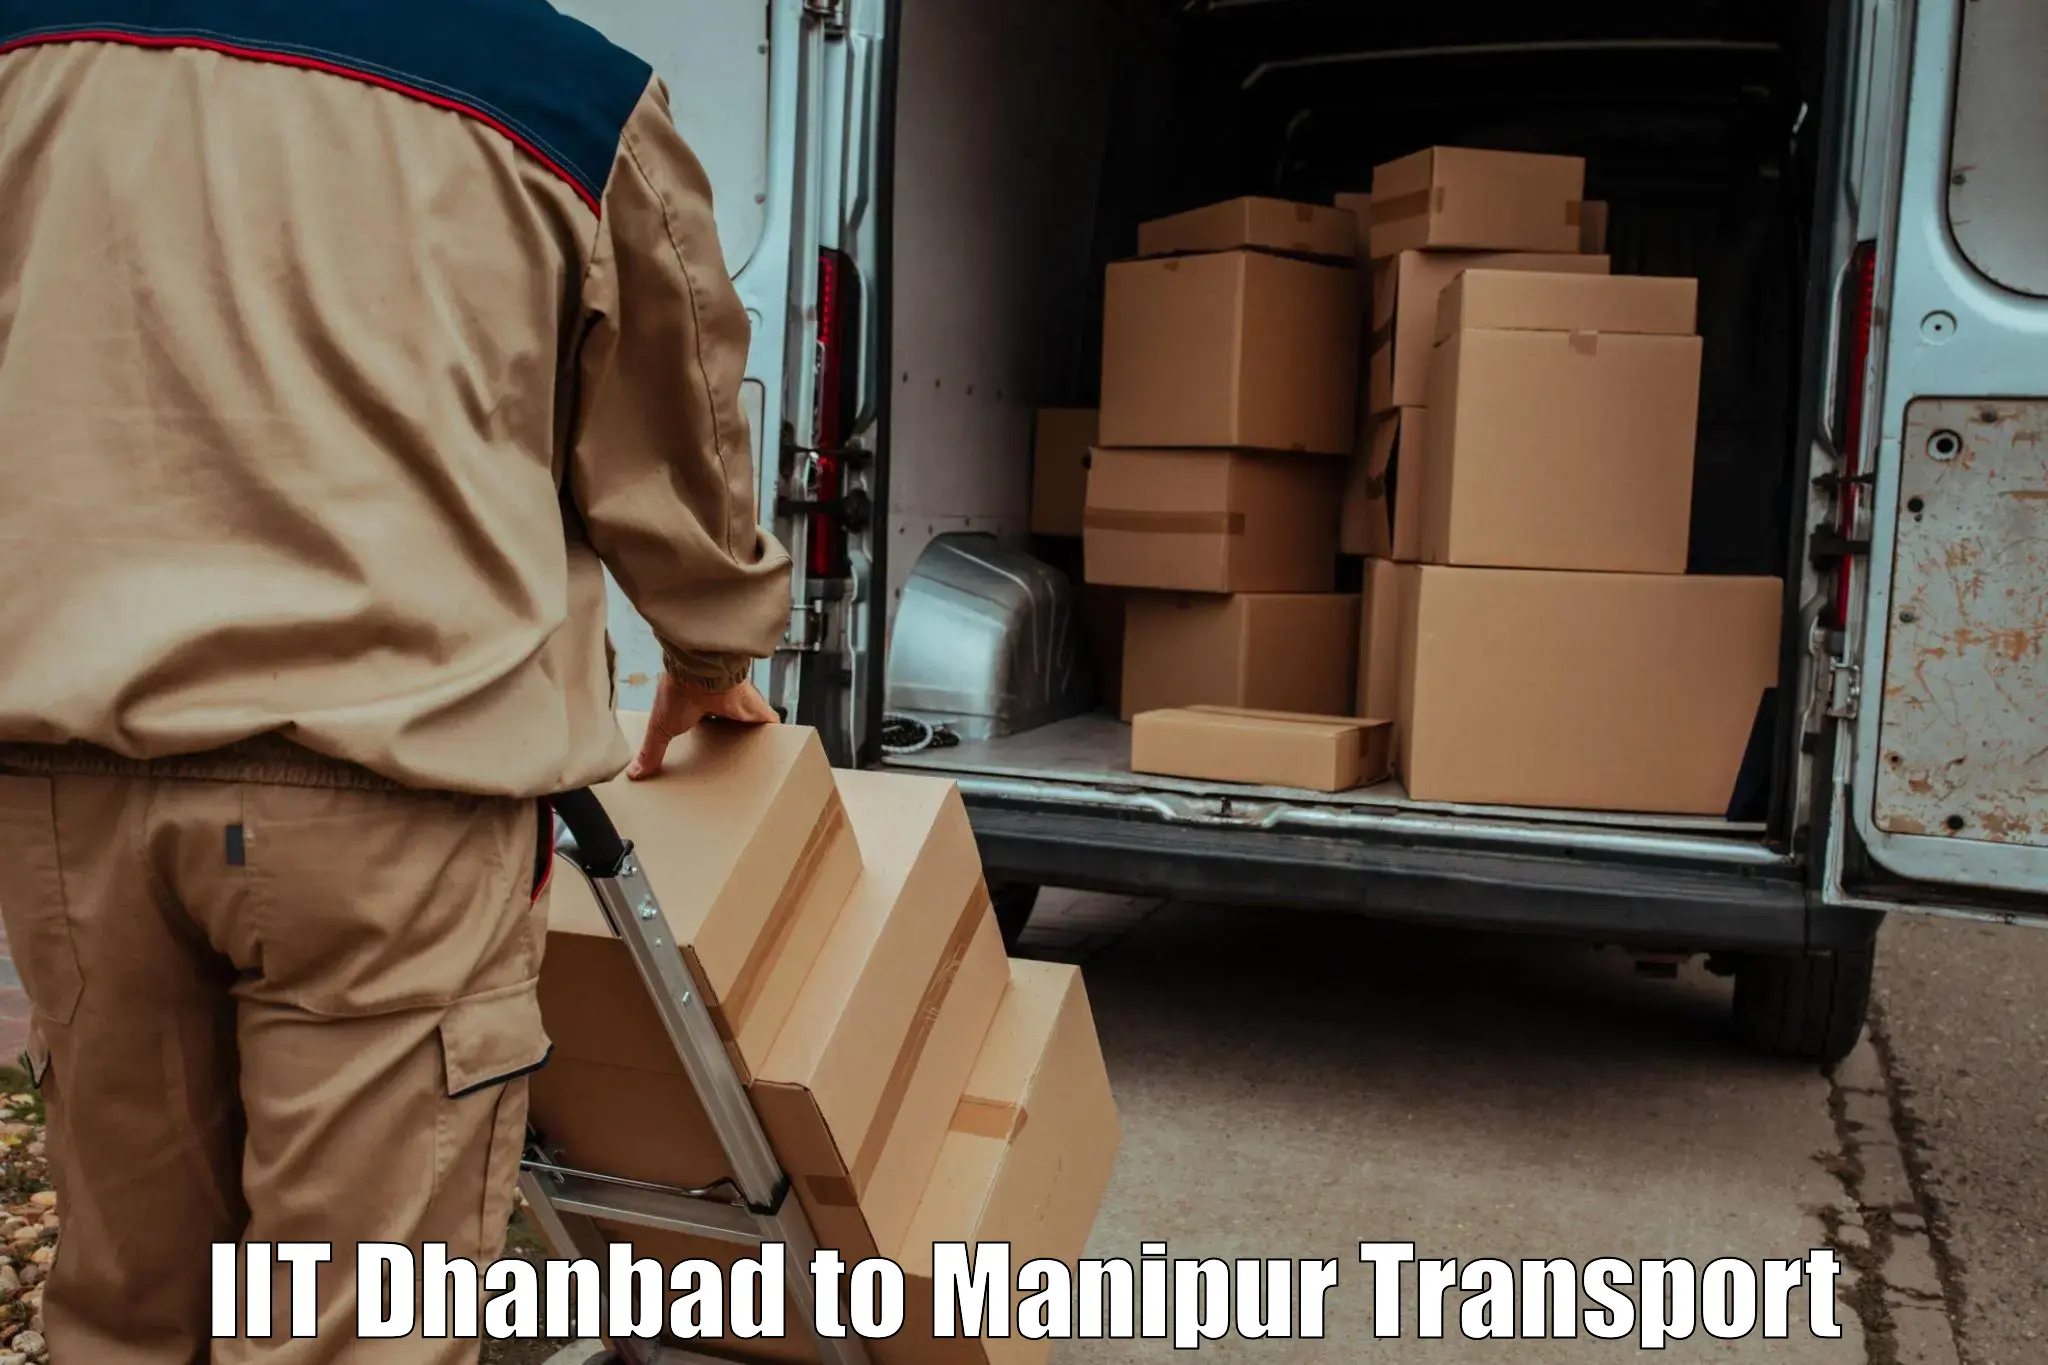 Lorry transport service IIT Dhanbad to Chandel